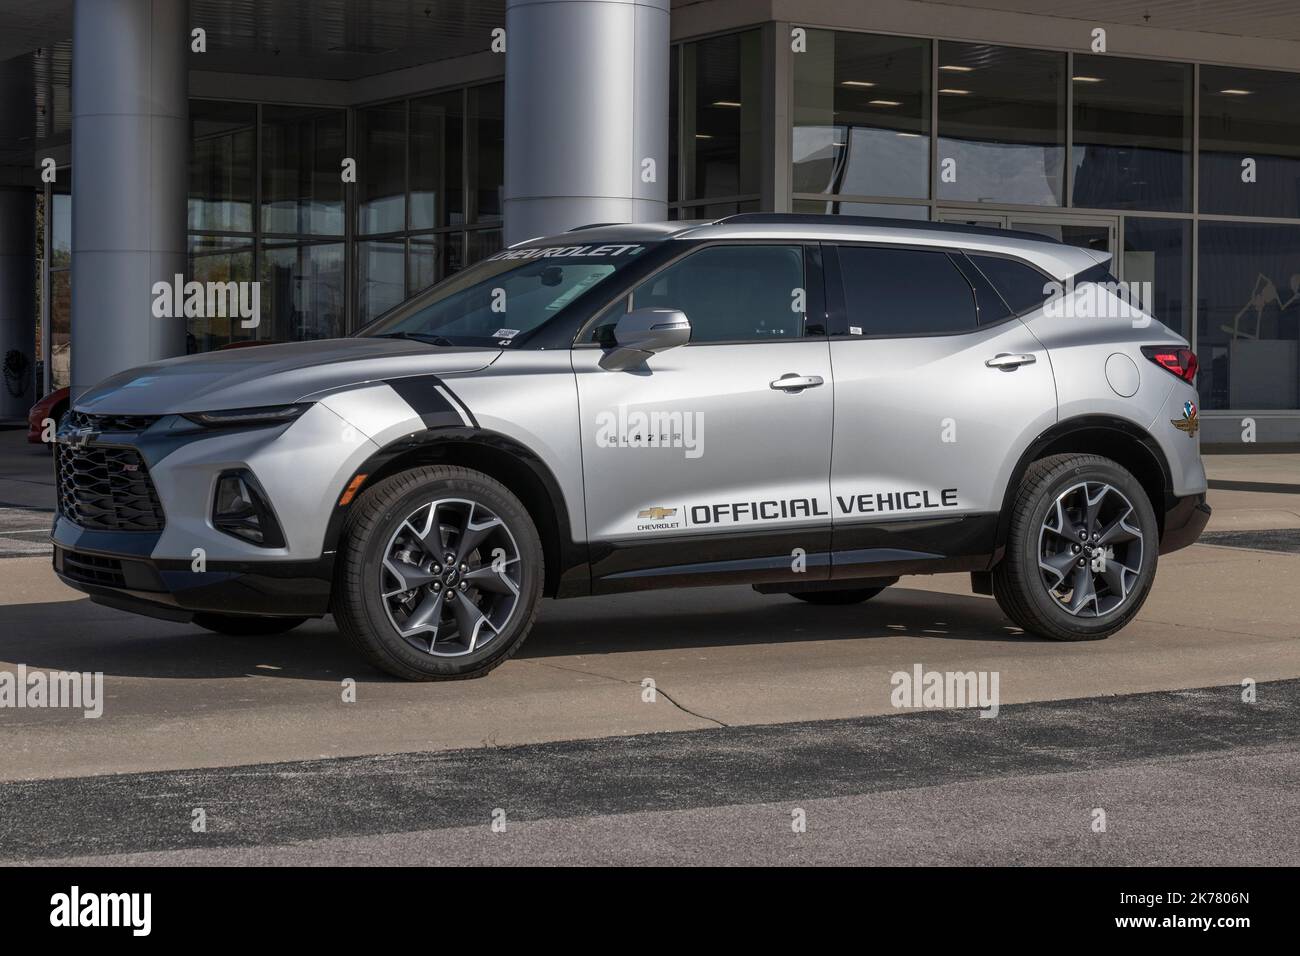 Avon - Circa October 2022: Chevrolet Blazer display at a dealership. Chevy offers the Blazer in 2LT, 3LT and RS models. Stock Photo